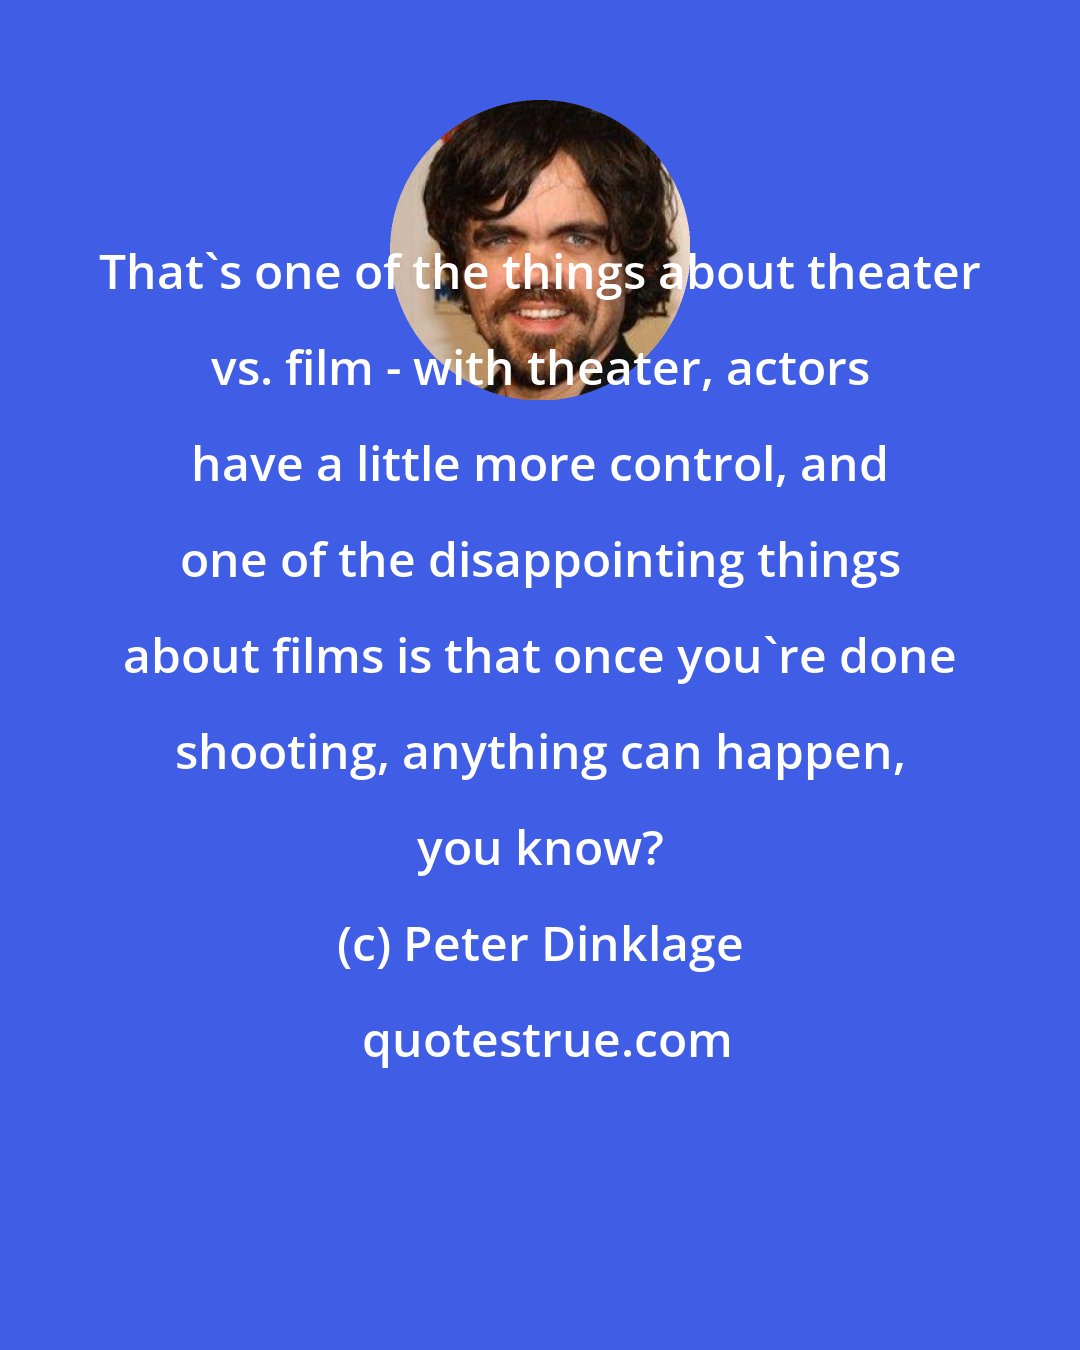 Peter Dinklage: That's one of the things about theater vs. film - with theater, actors have a little more control, and one of the disappointing things about films is that once you're done shooting, anything can happen, you know?